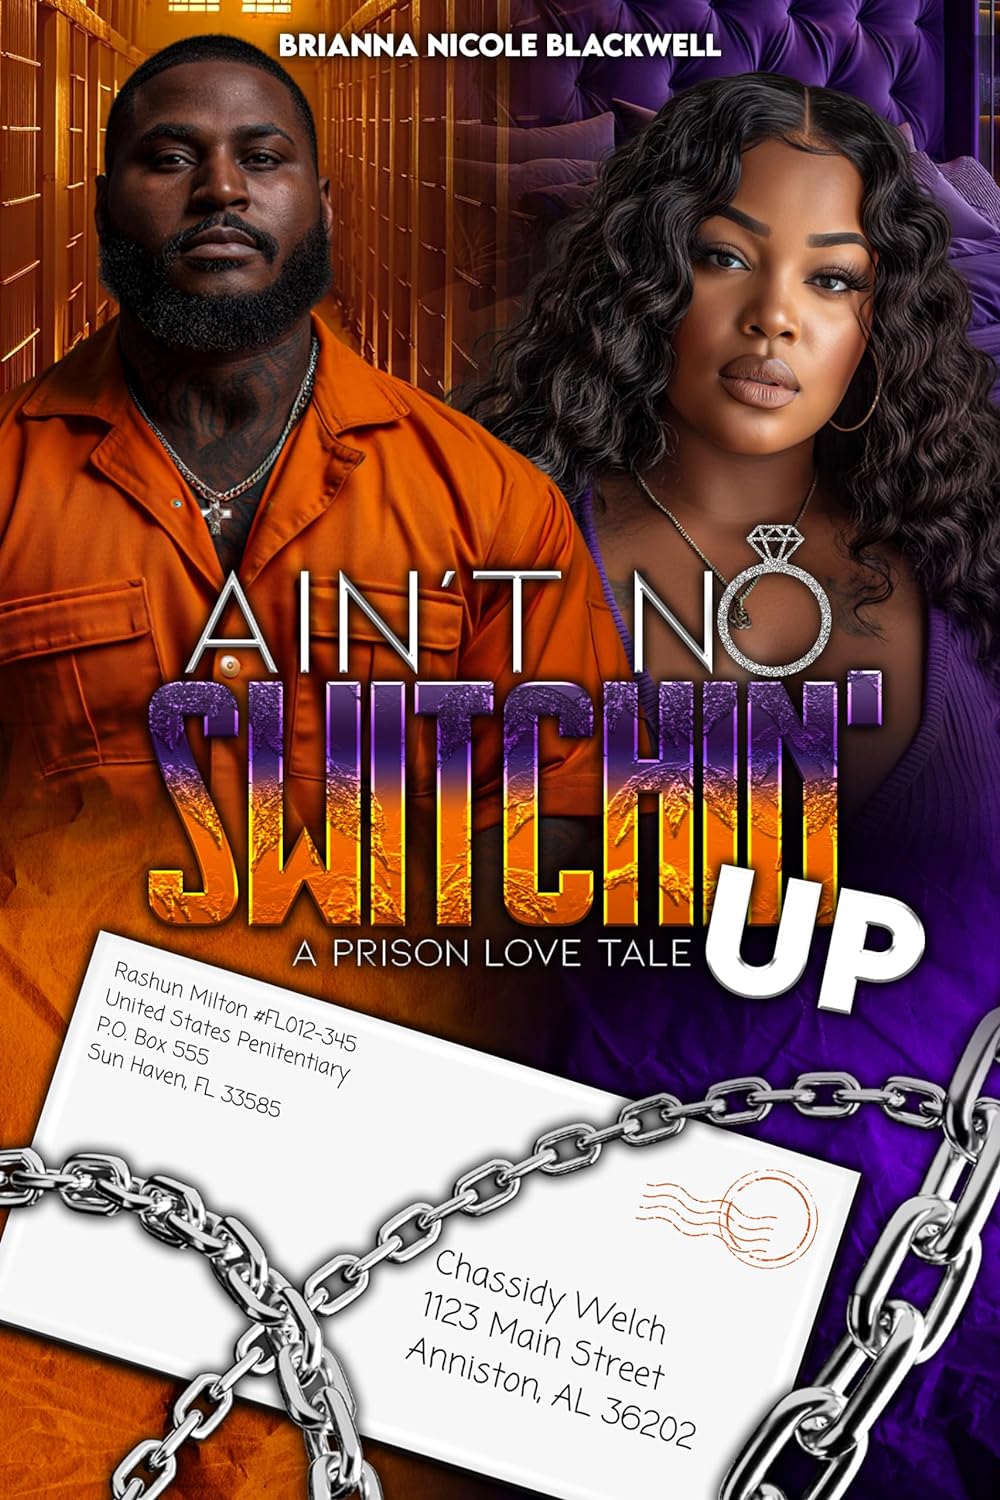 Ain't No Switchin Up: A Prison Love Tale - CA Corrections Book Store